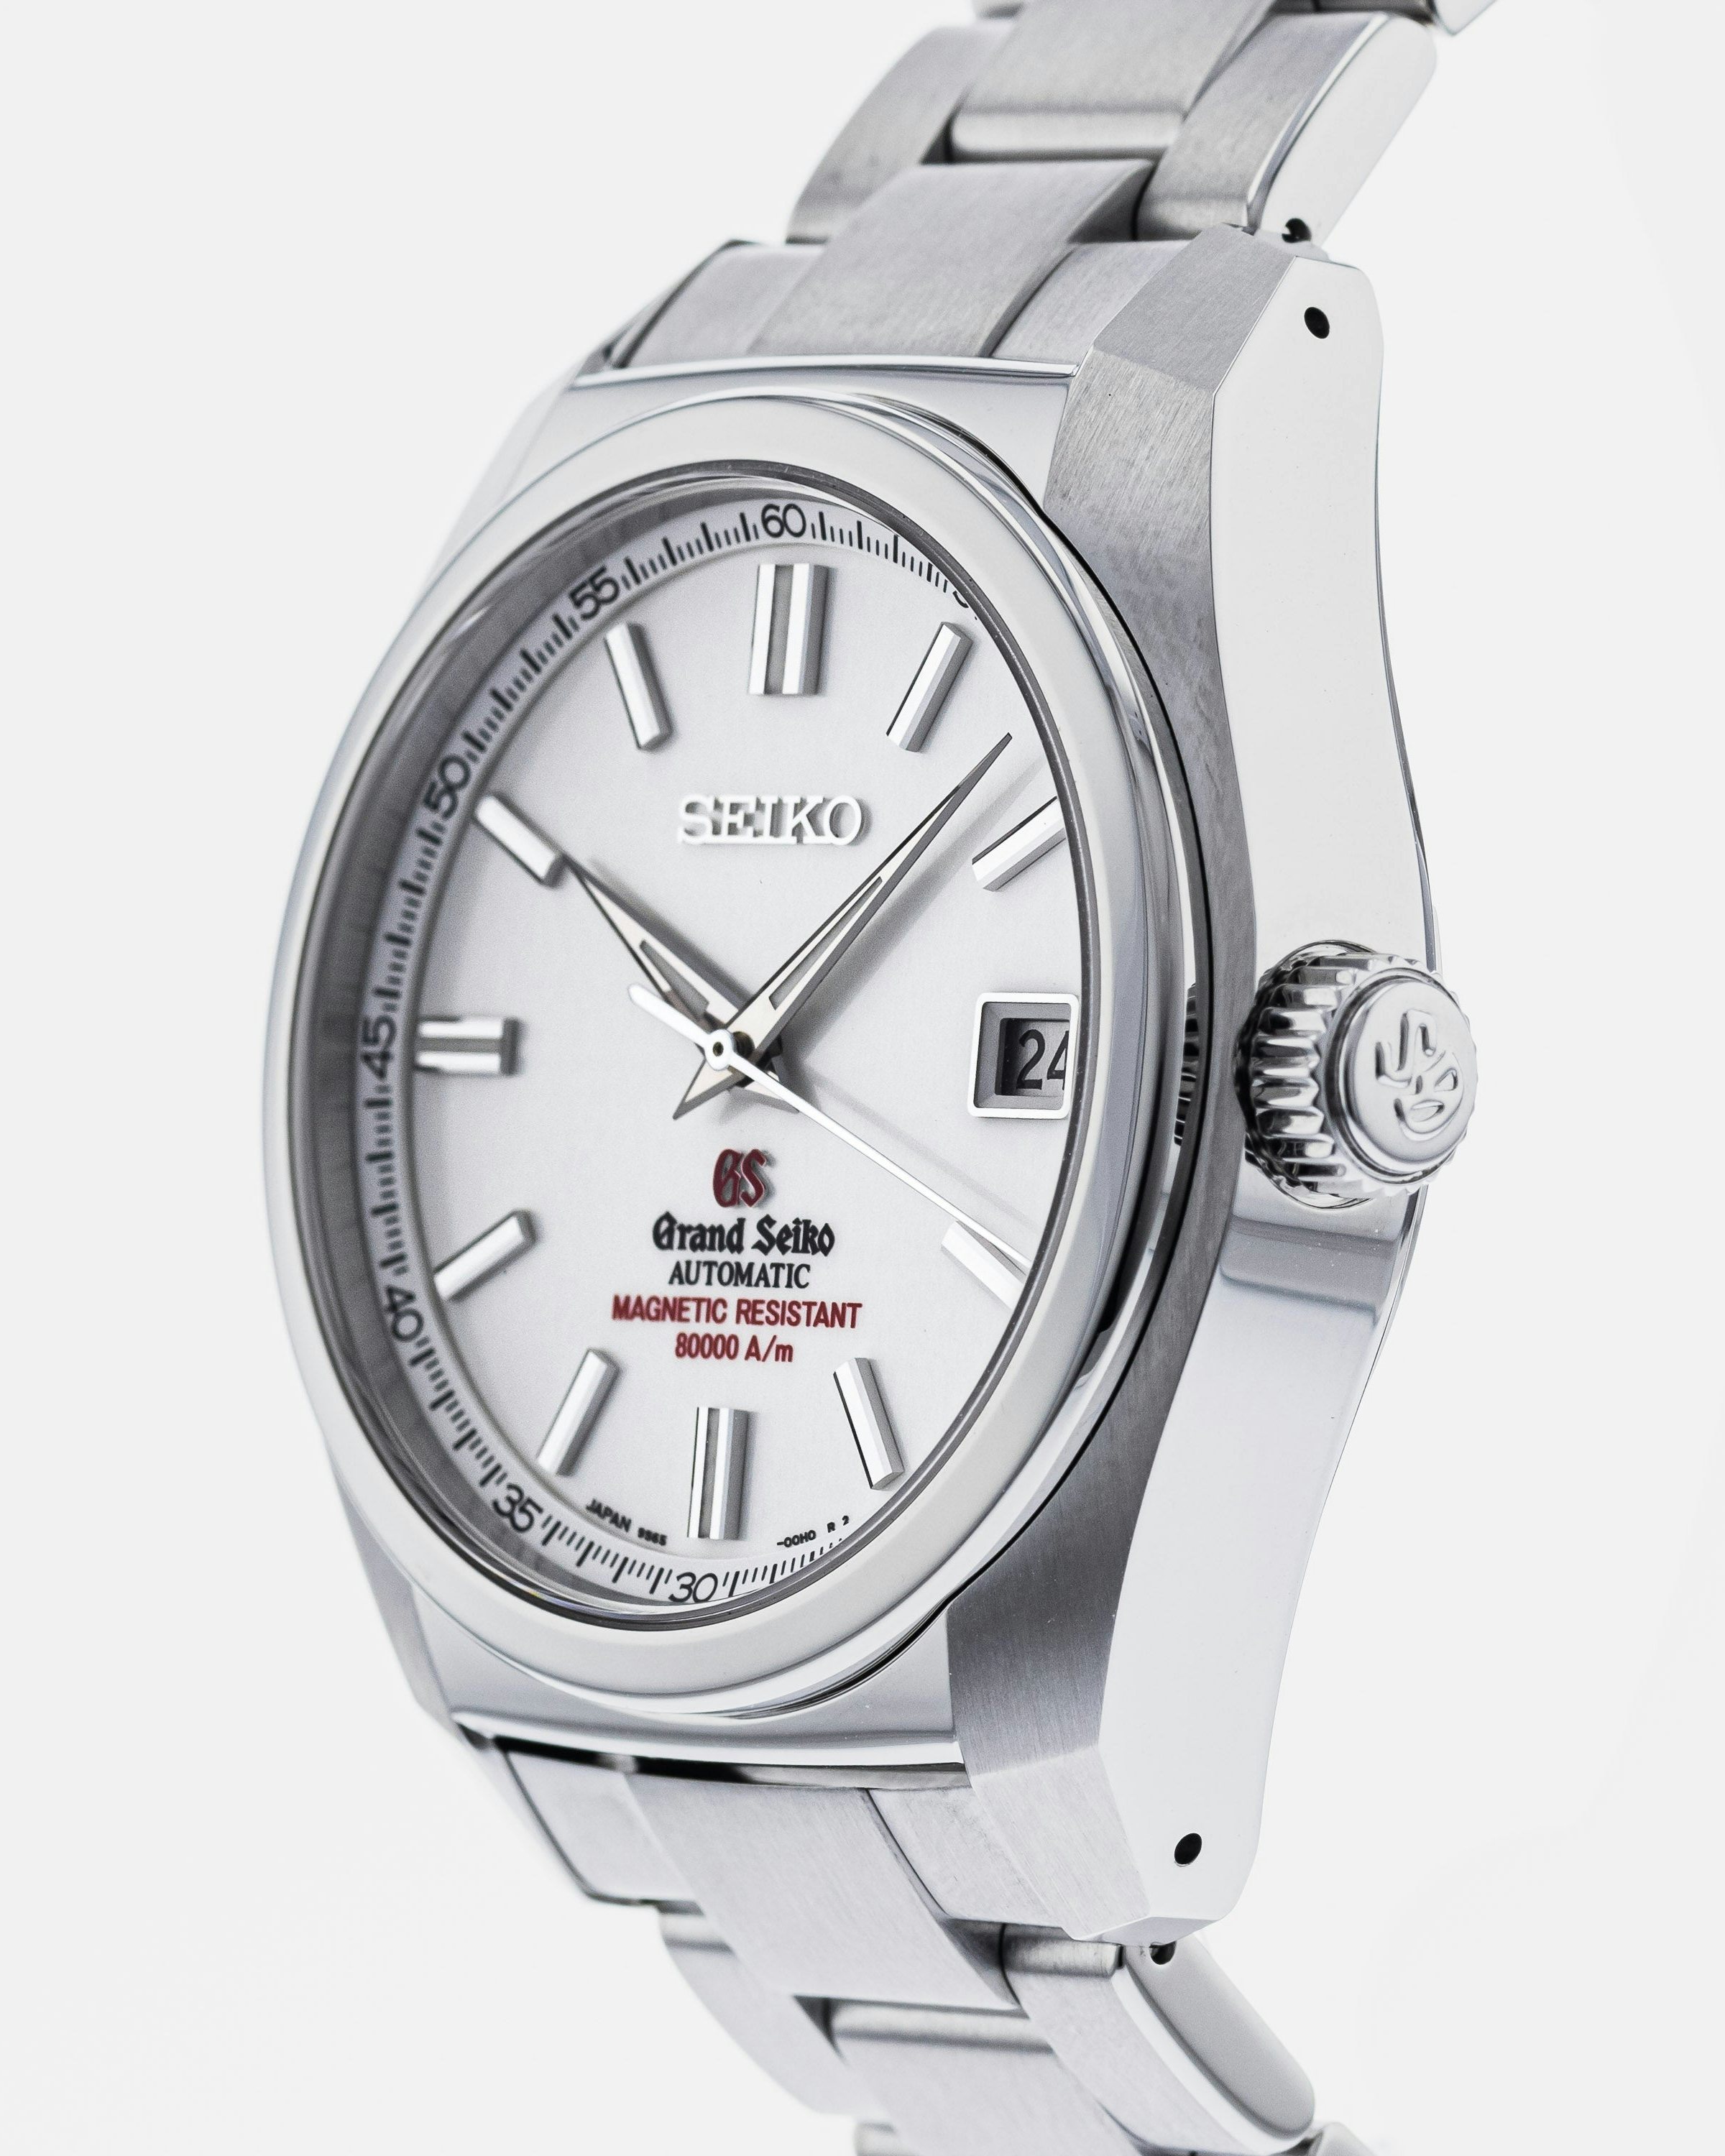 Grand Seiko Heritage Automatic Magnetic Resistant Boutique Edition SBG –  HODINKEE Shop